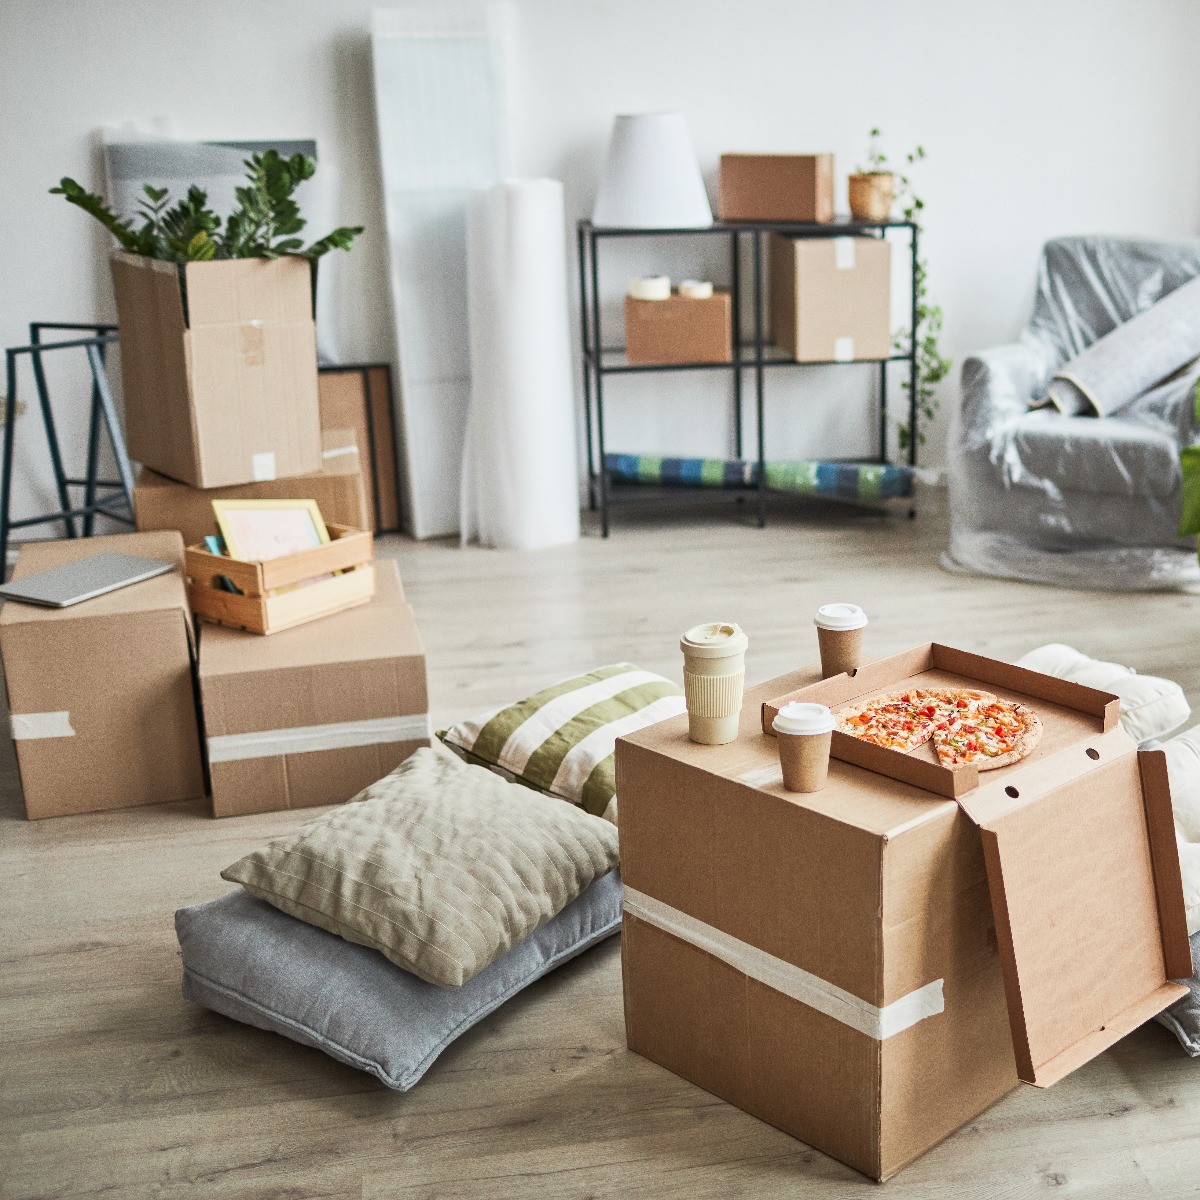 Let's face it, moving into a new home is both equal parts stressful and exciting. With all the packing and unpacking, it can be easy just to order takeout. Here are some fast and easy meals for new homeowners: tinyurl.com/yeyr7vsa